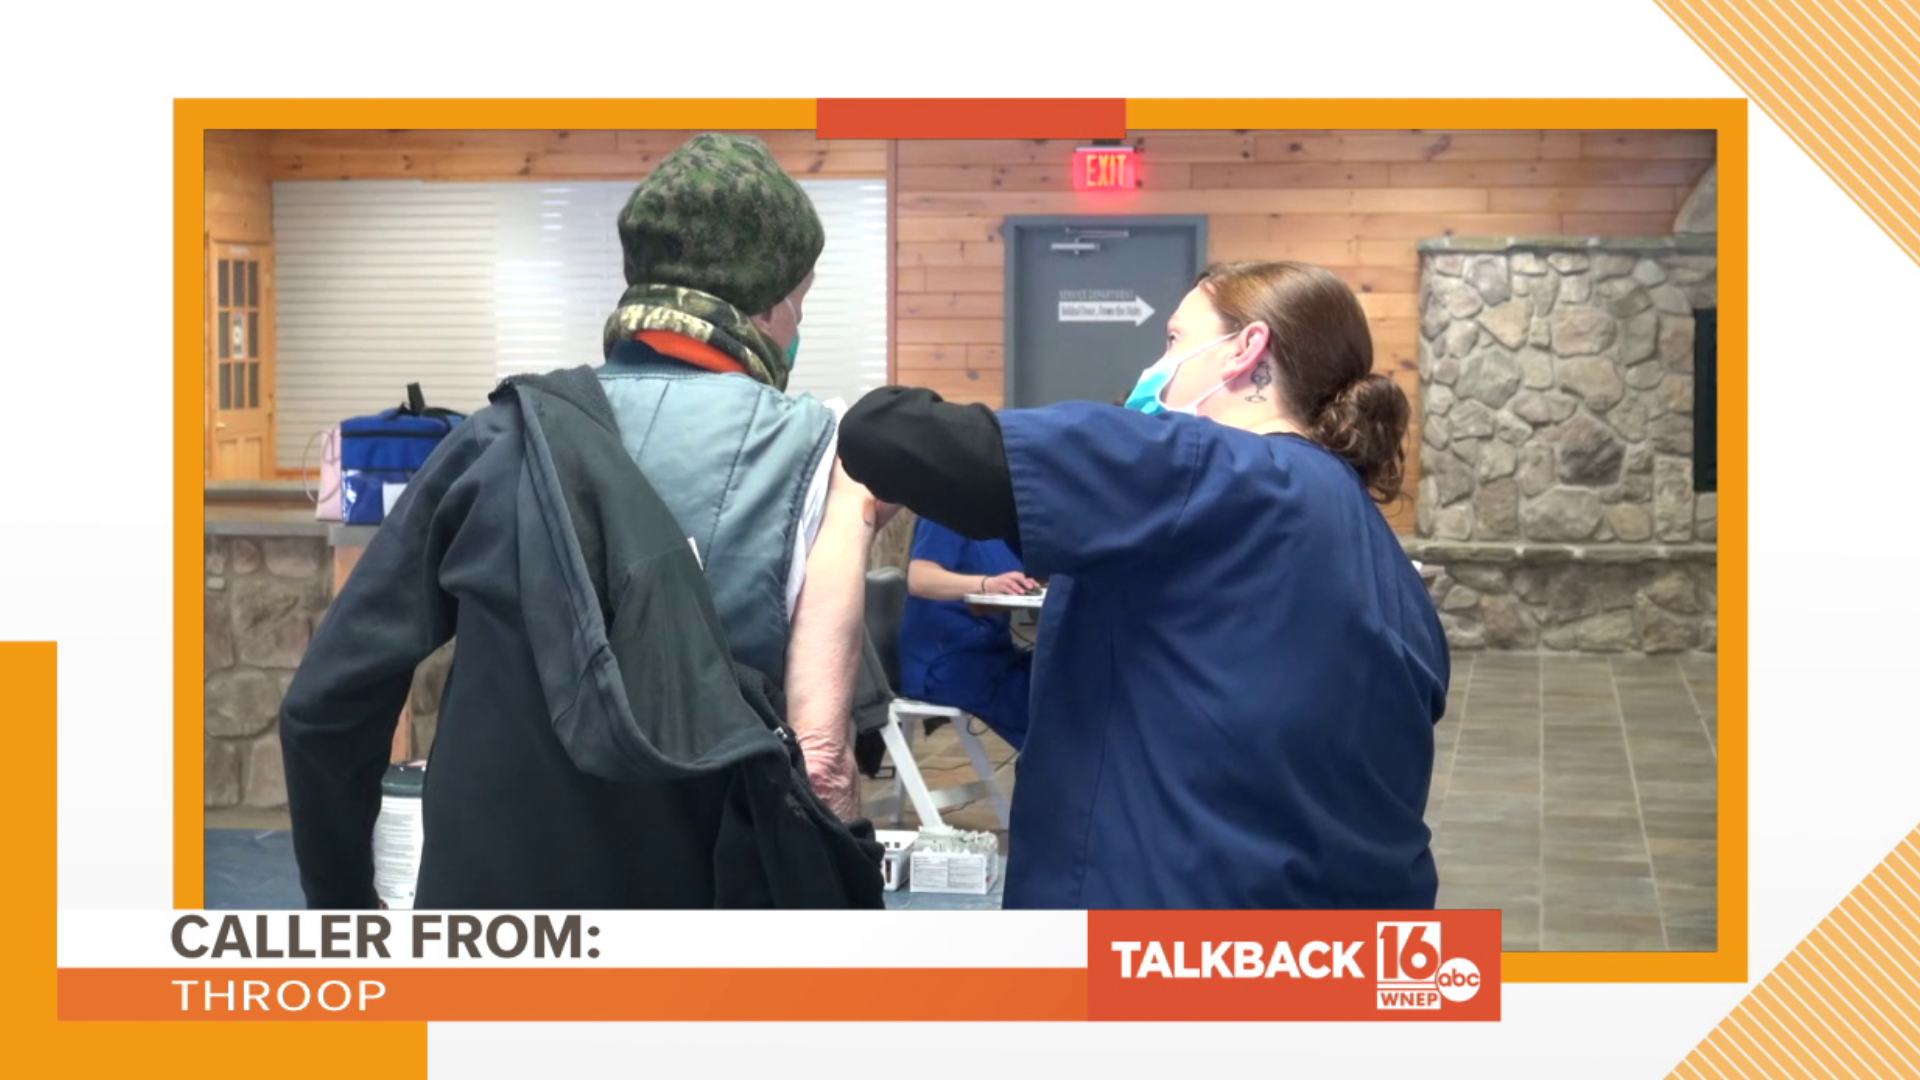 A range of topics including ties and needles are the subject of this segment of Talkback 16.